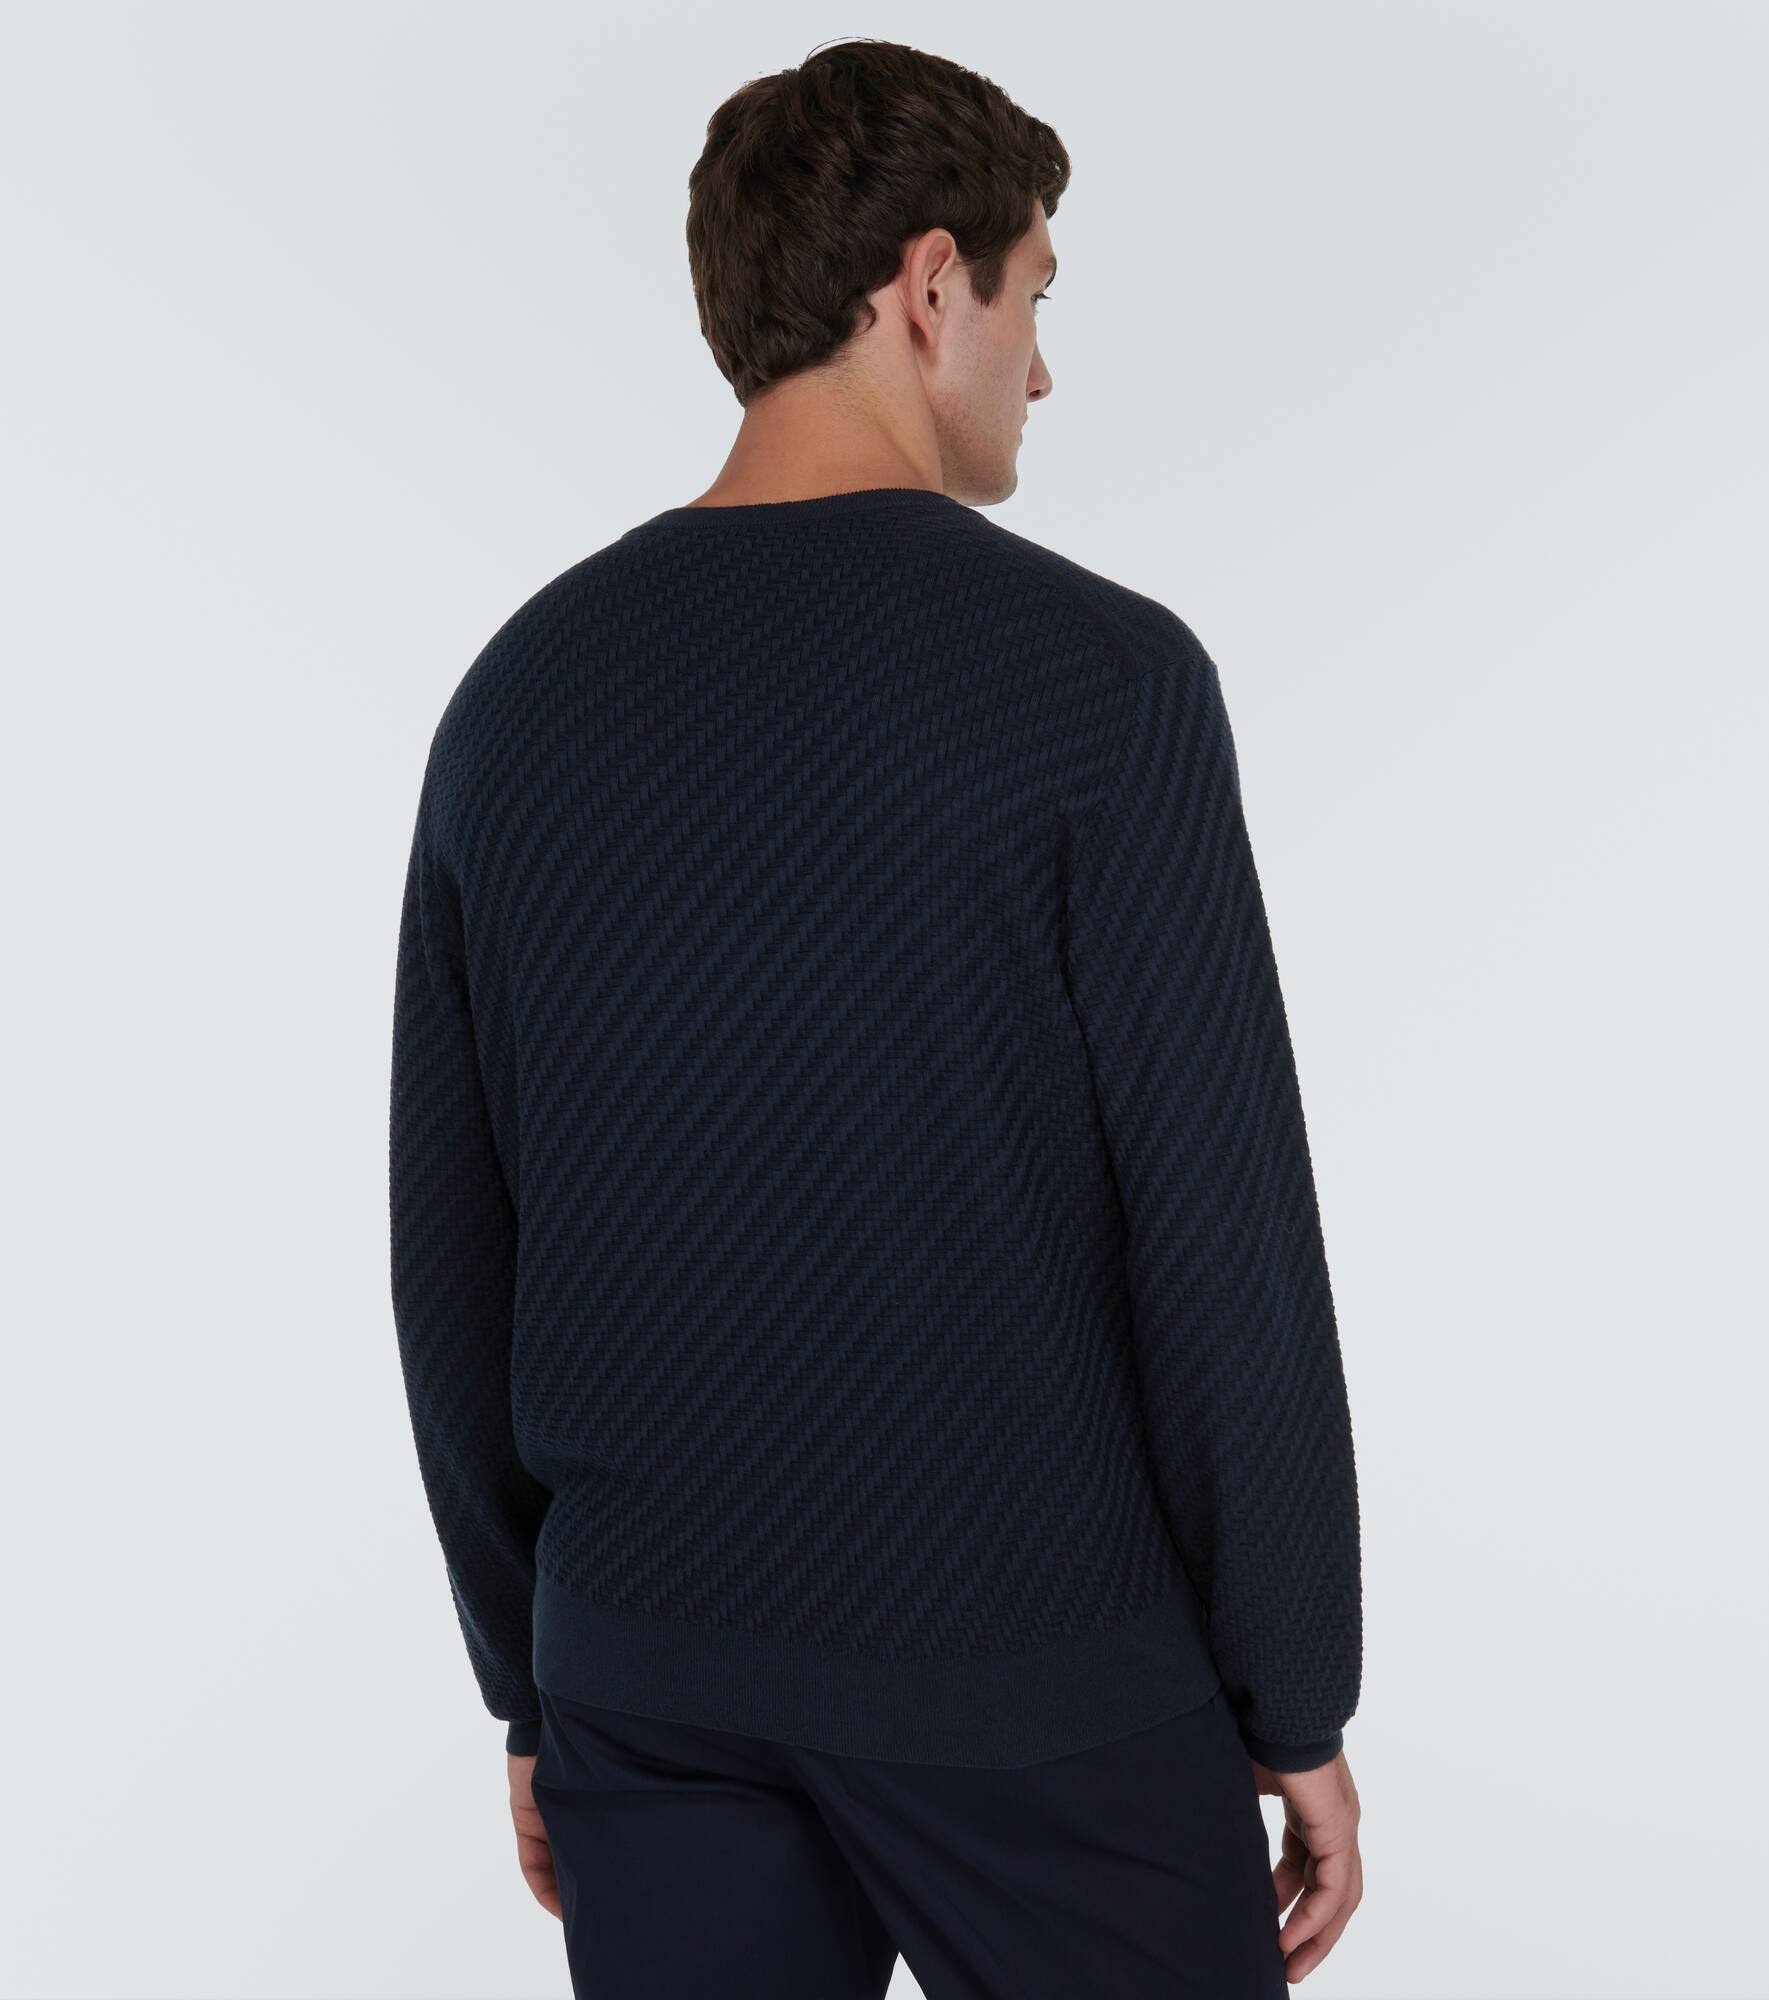 Cotton, silk, and cashmere sweater - 4